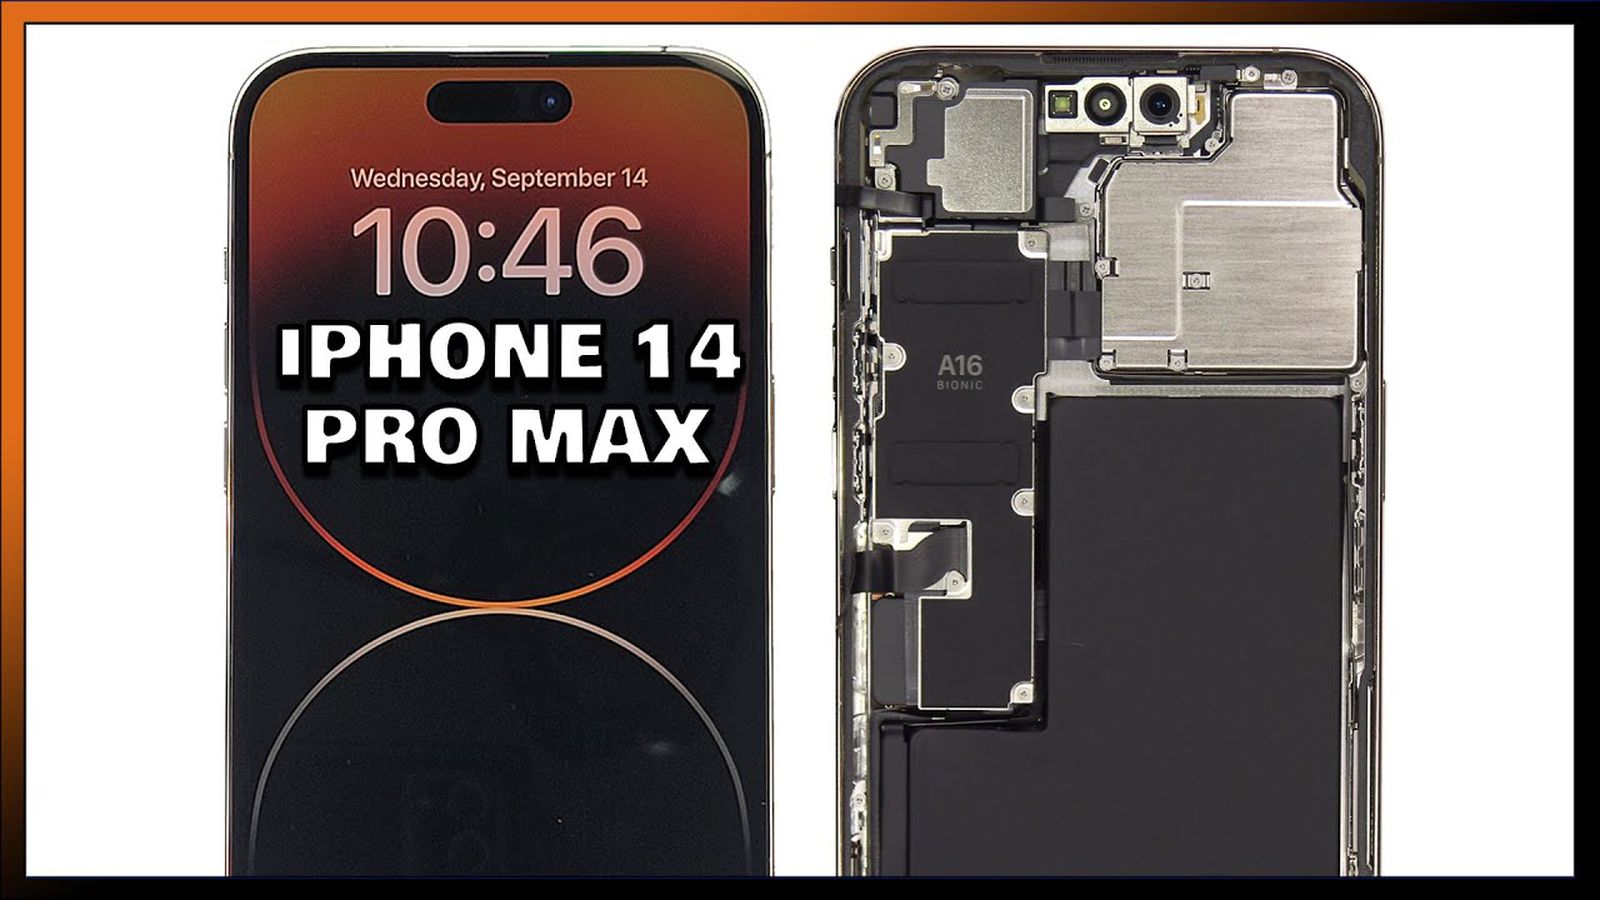 Video Offers First Look Inside iPhone 14 Pro Max With New Display, Larger Camera..